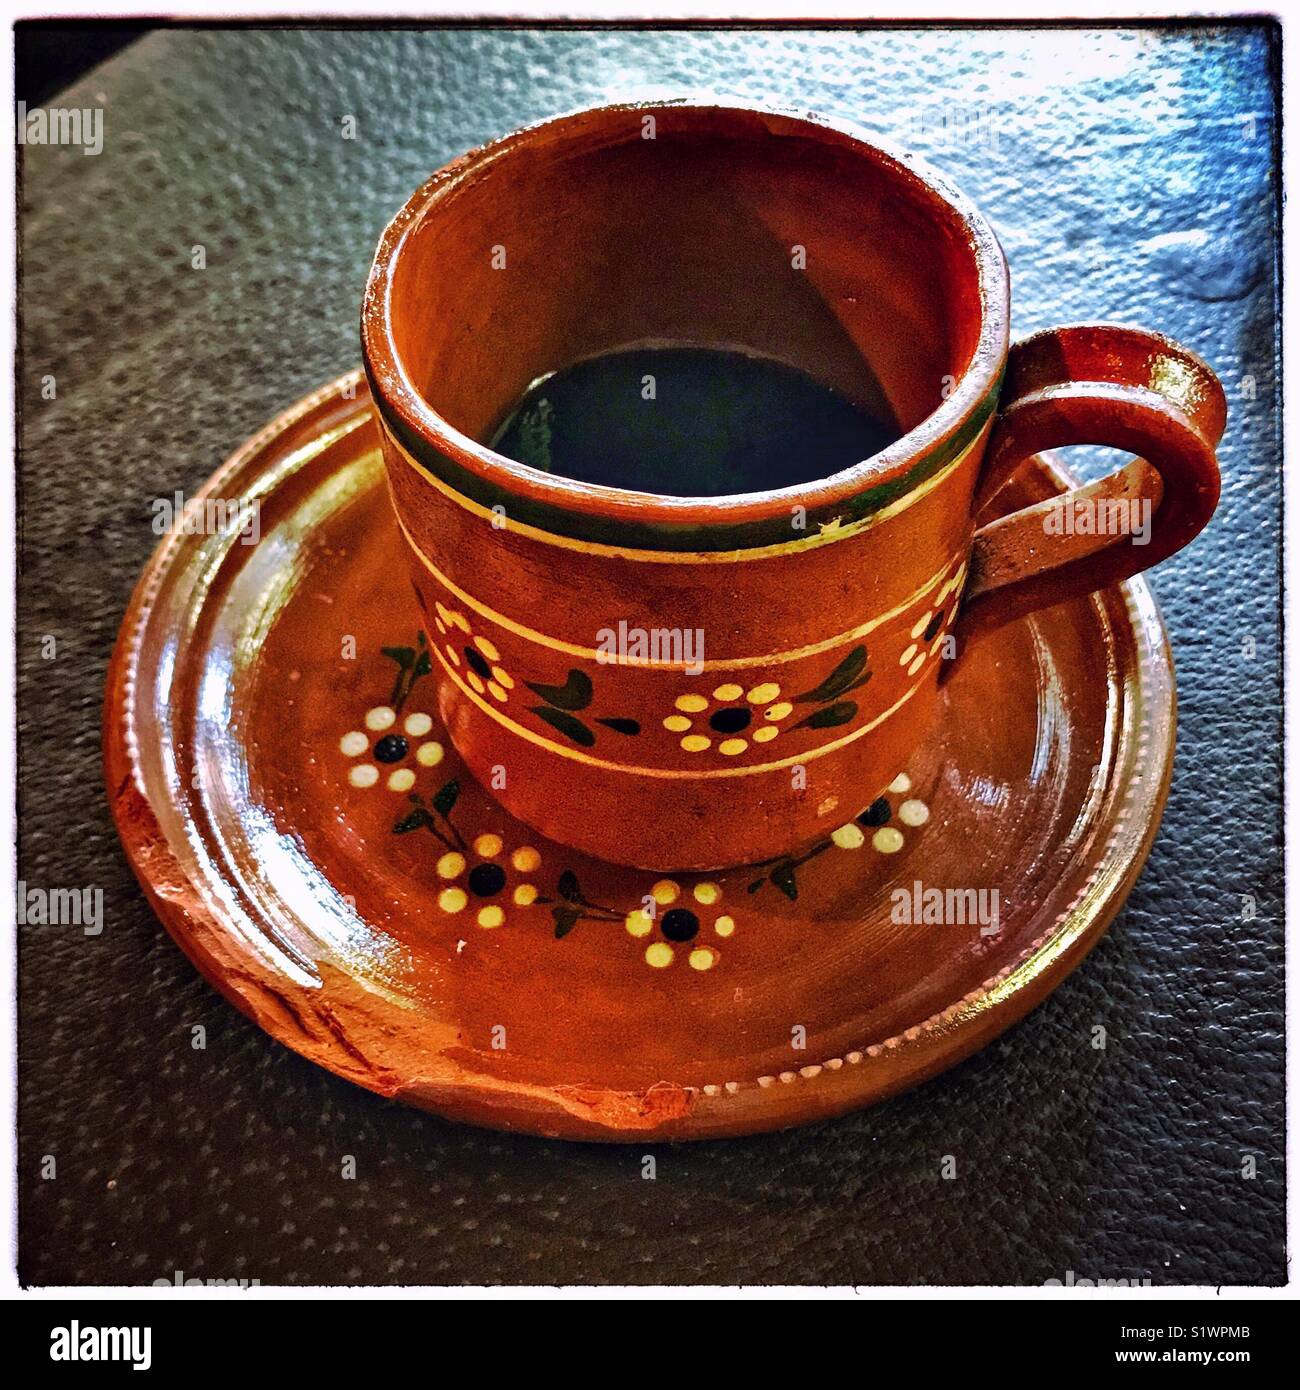 https://c8.alamy.com/comp/S1WPMB/a-mexican-clay-cup-and-chipped-saucer-with-a-flower-design-is-partially-S1WPMB.jpg